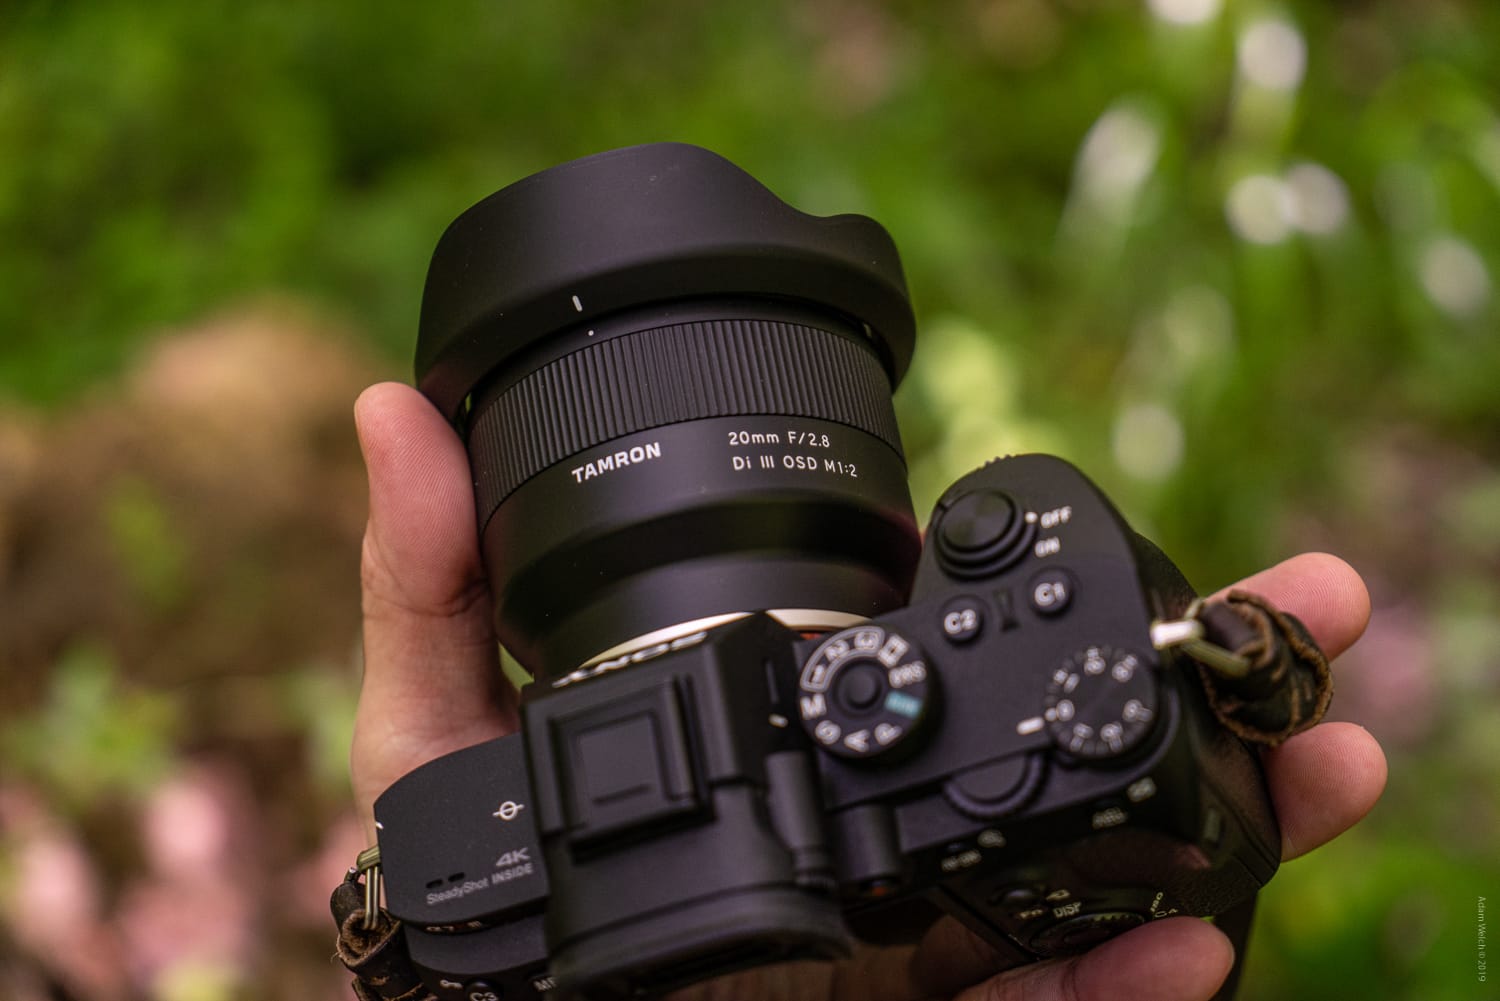 Hands-On Review of the Tamron 20mm f/2.8 Di III OSD M1:2 for Sony 